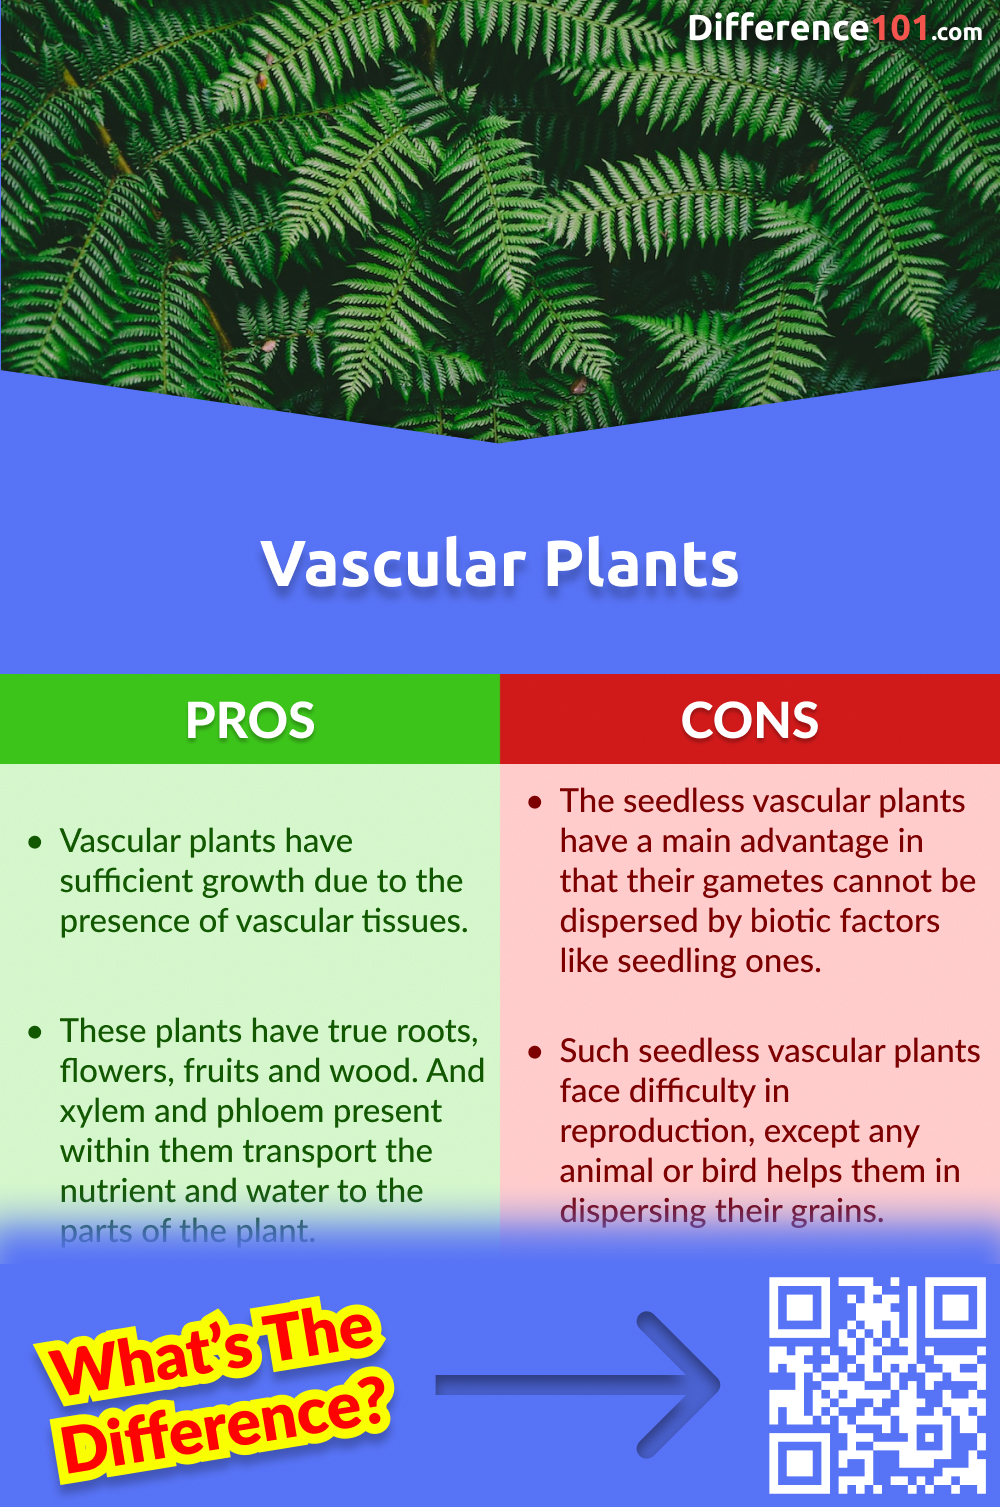 Vascular Plants Pros and Cons
